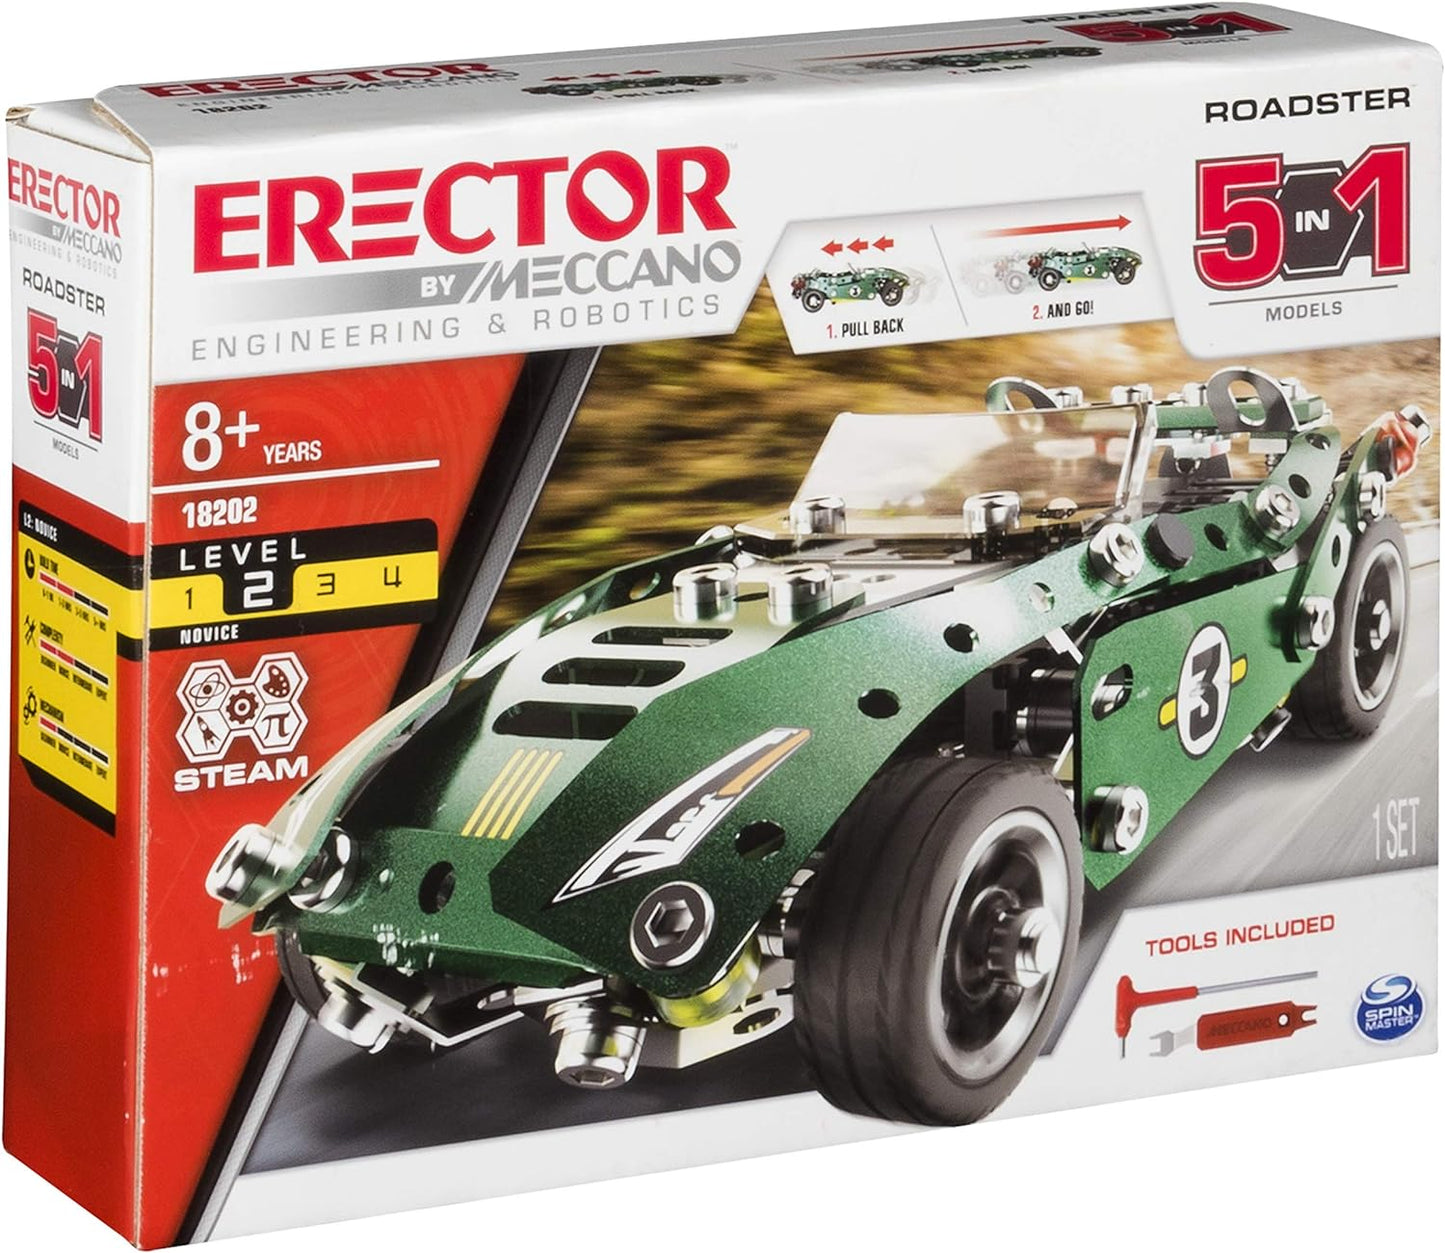 Meccano Erector Roadster 5-in-1 Building Kit, 174 Parts, STEM Engineering Education Toy for Ages 8 and Up